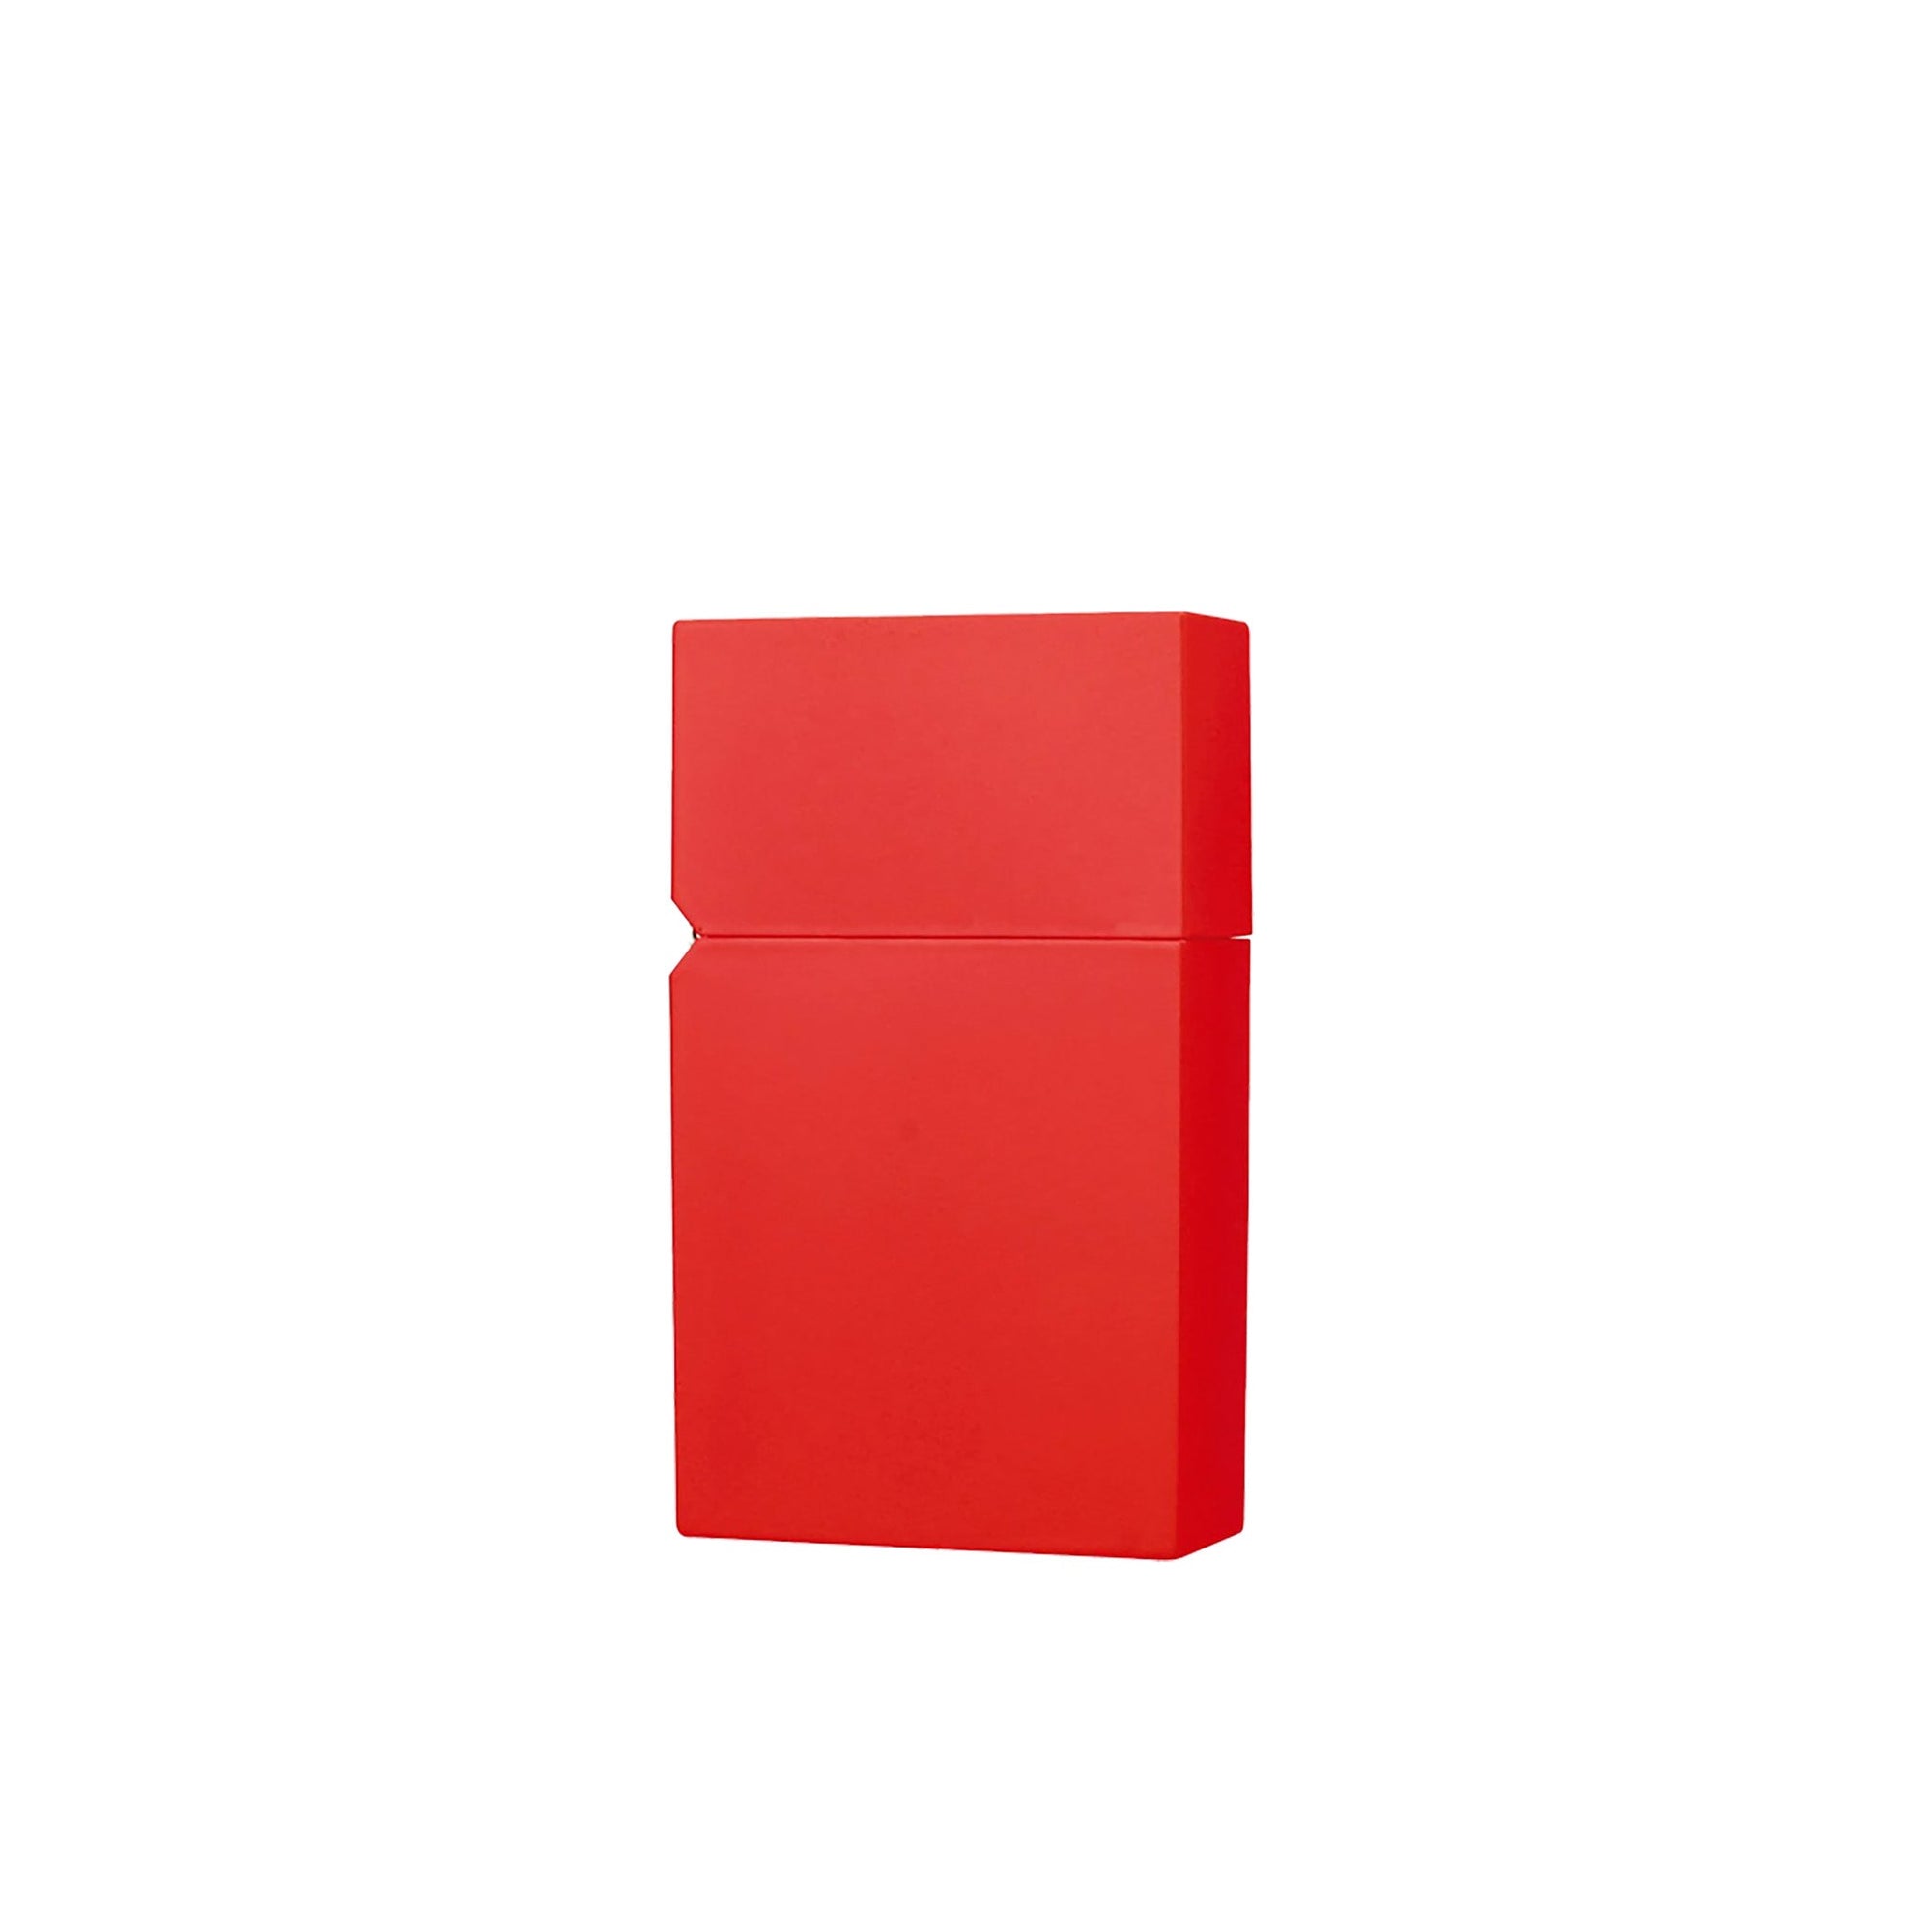 Hard-Edge Lighter - Red - Space Camp